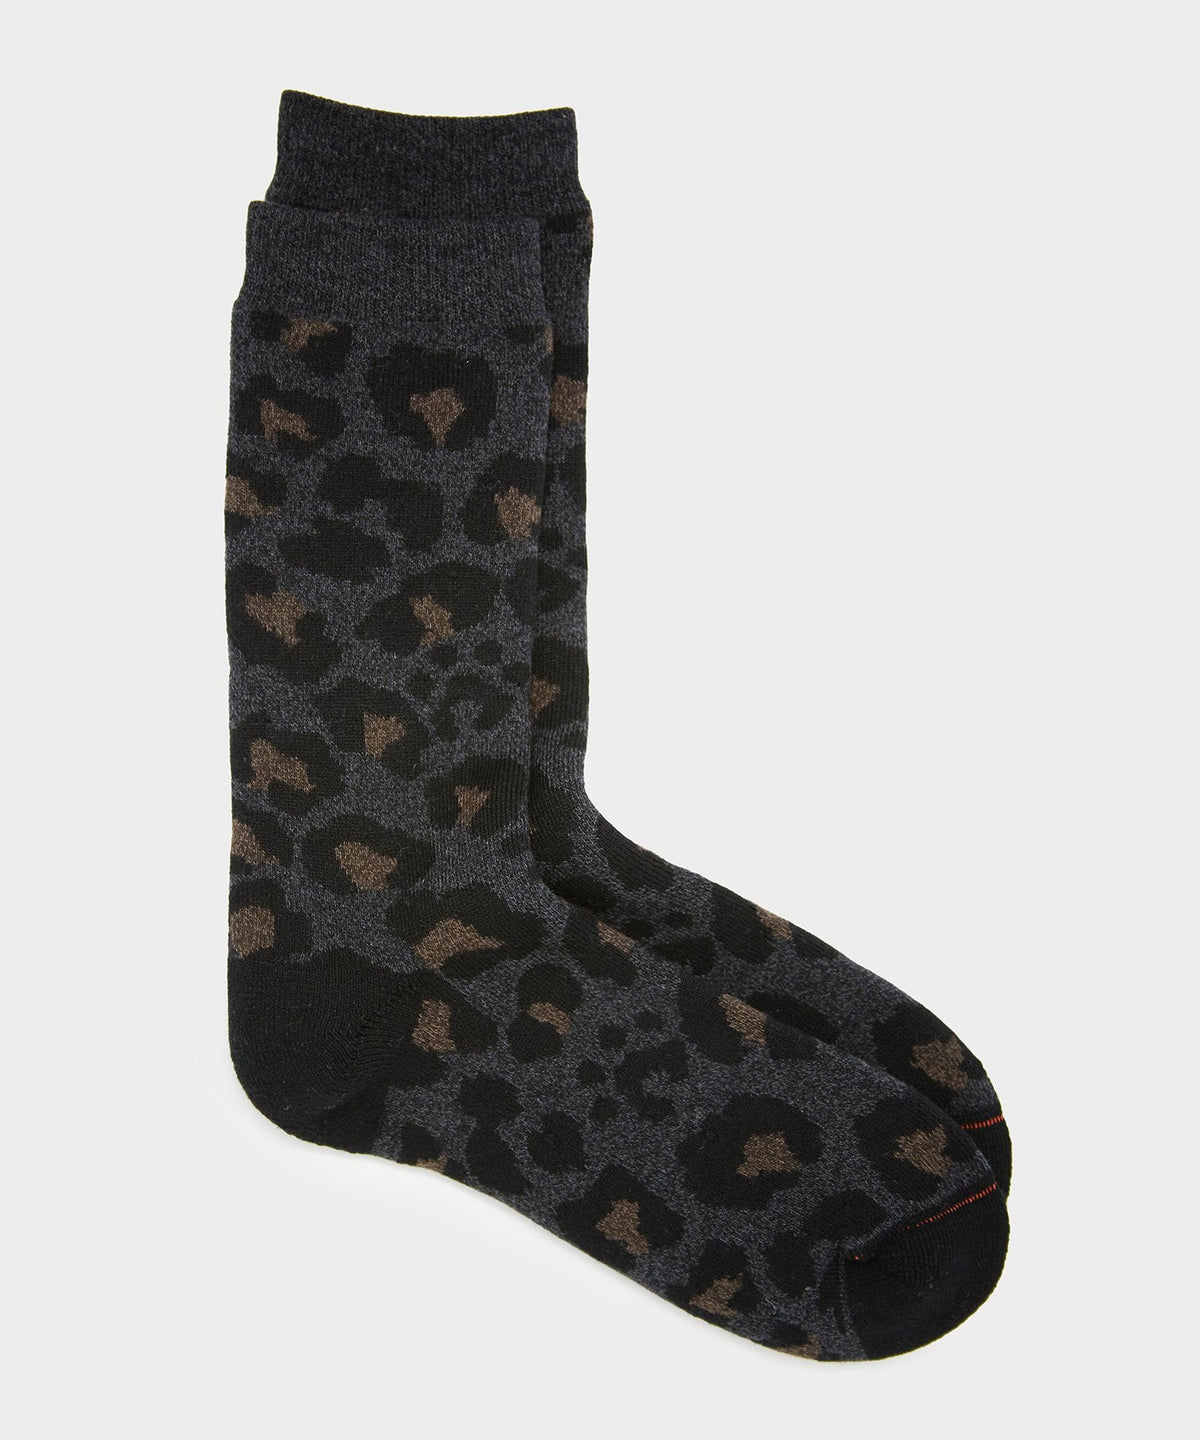 Rototo Pile Leopard Crew Socks in Charcoal